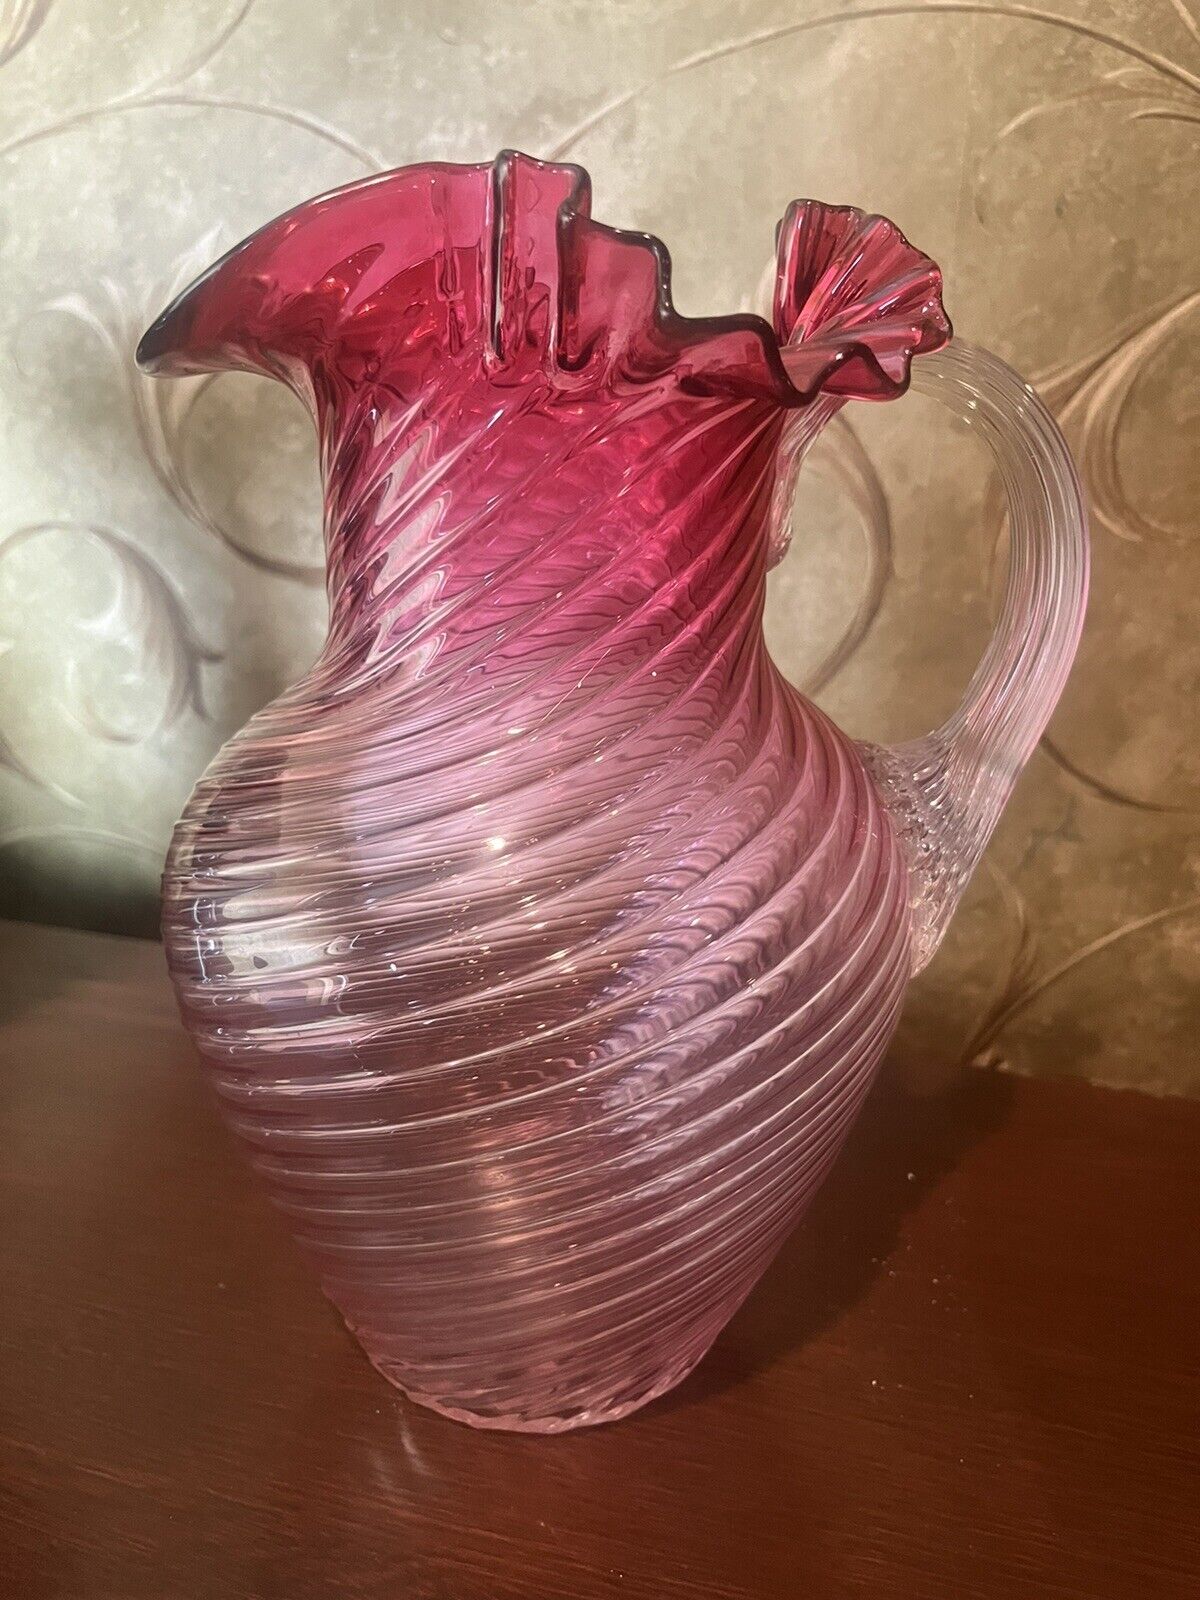 Exquisite Early American Swirl Glass Pitcher